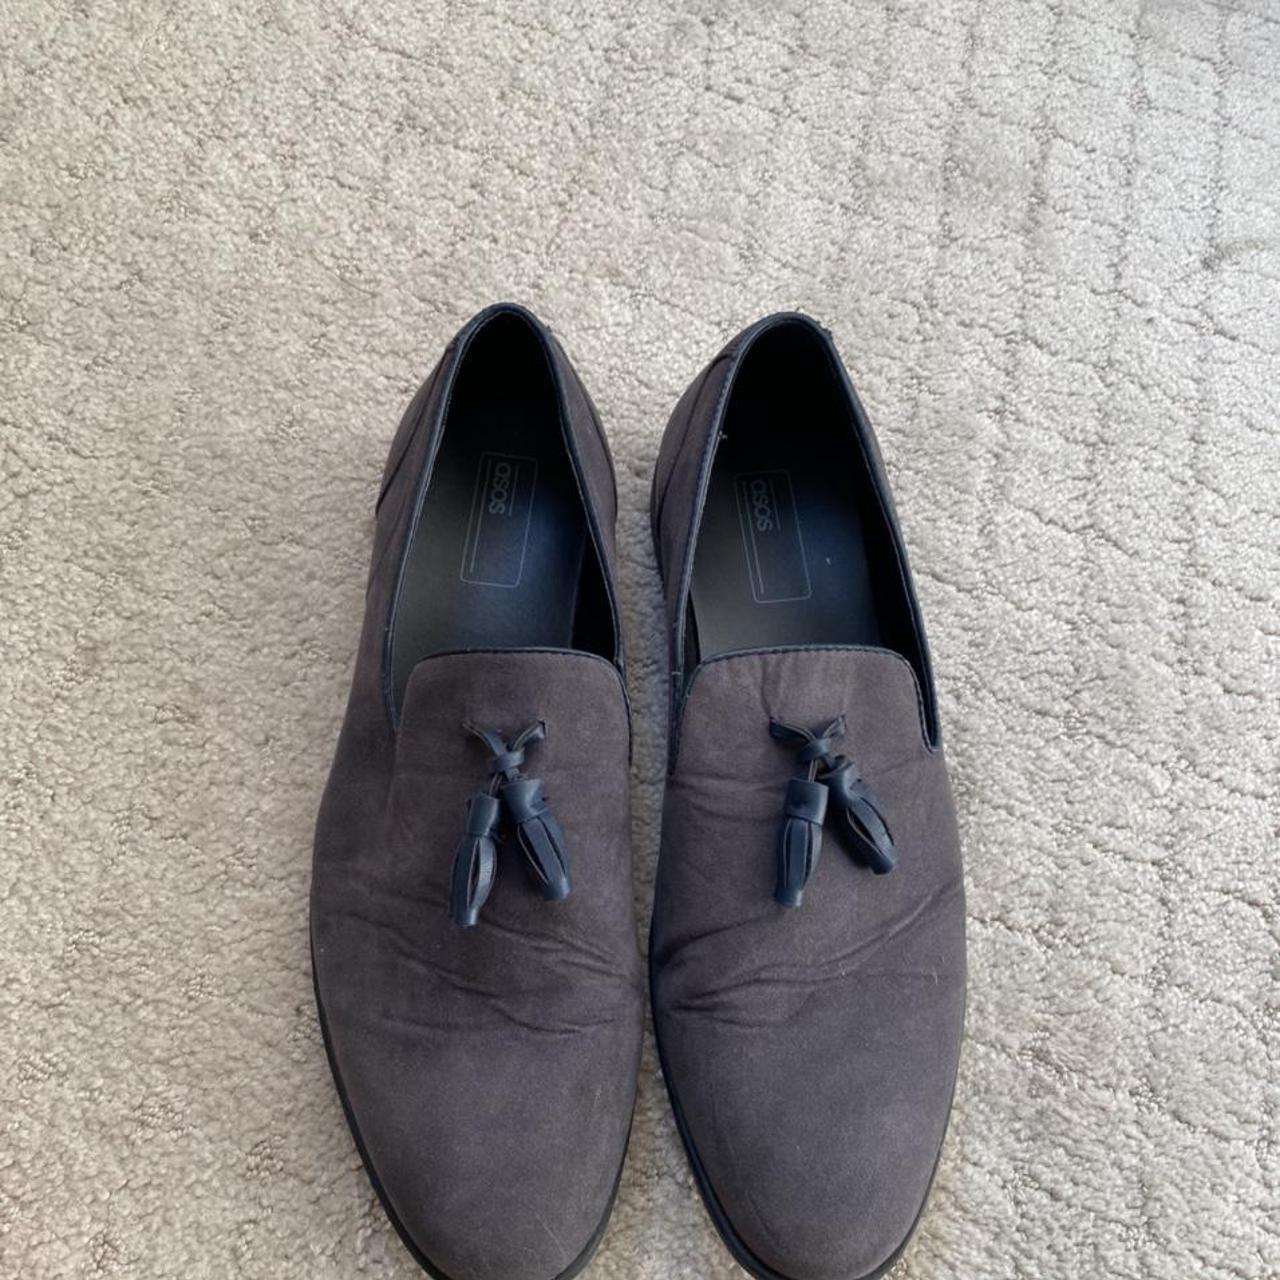 Product Image 3 - Selling dark gray loafers from